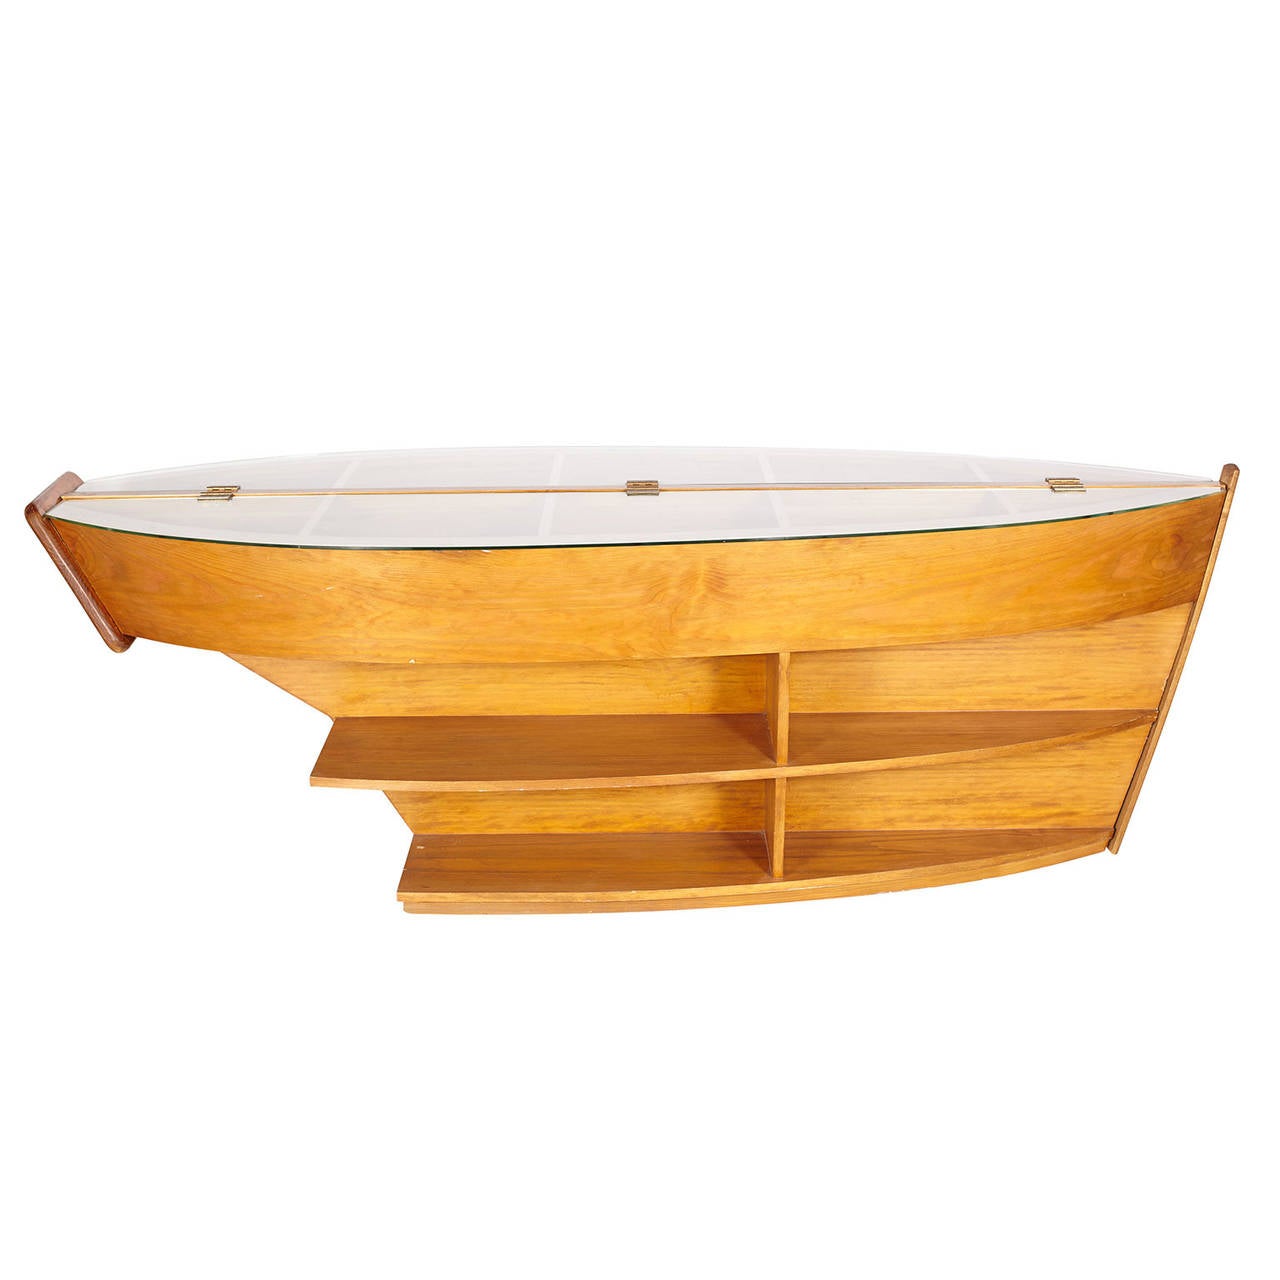 20th Century Wooden Library Storage Case Boat Table